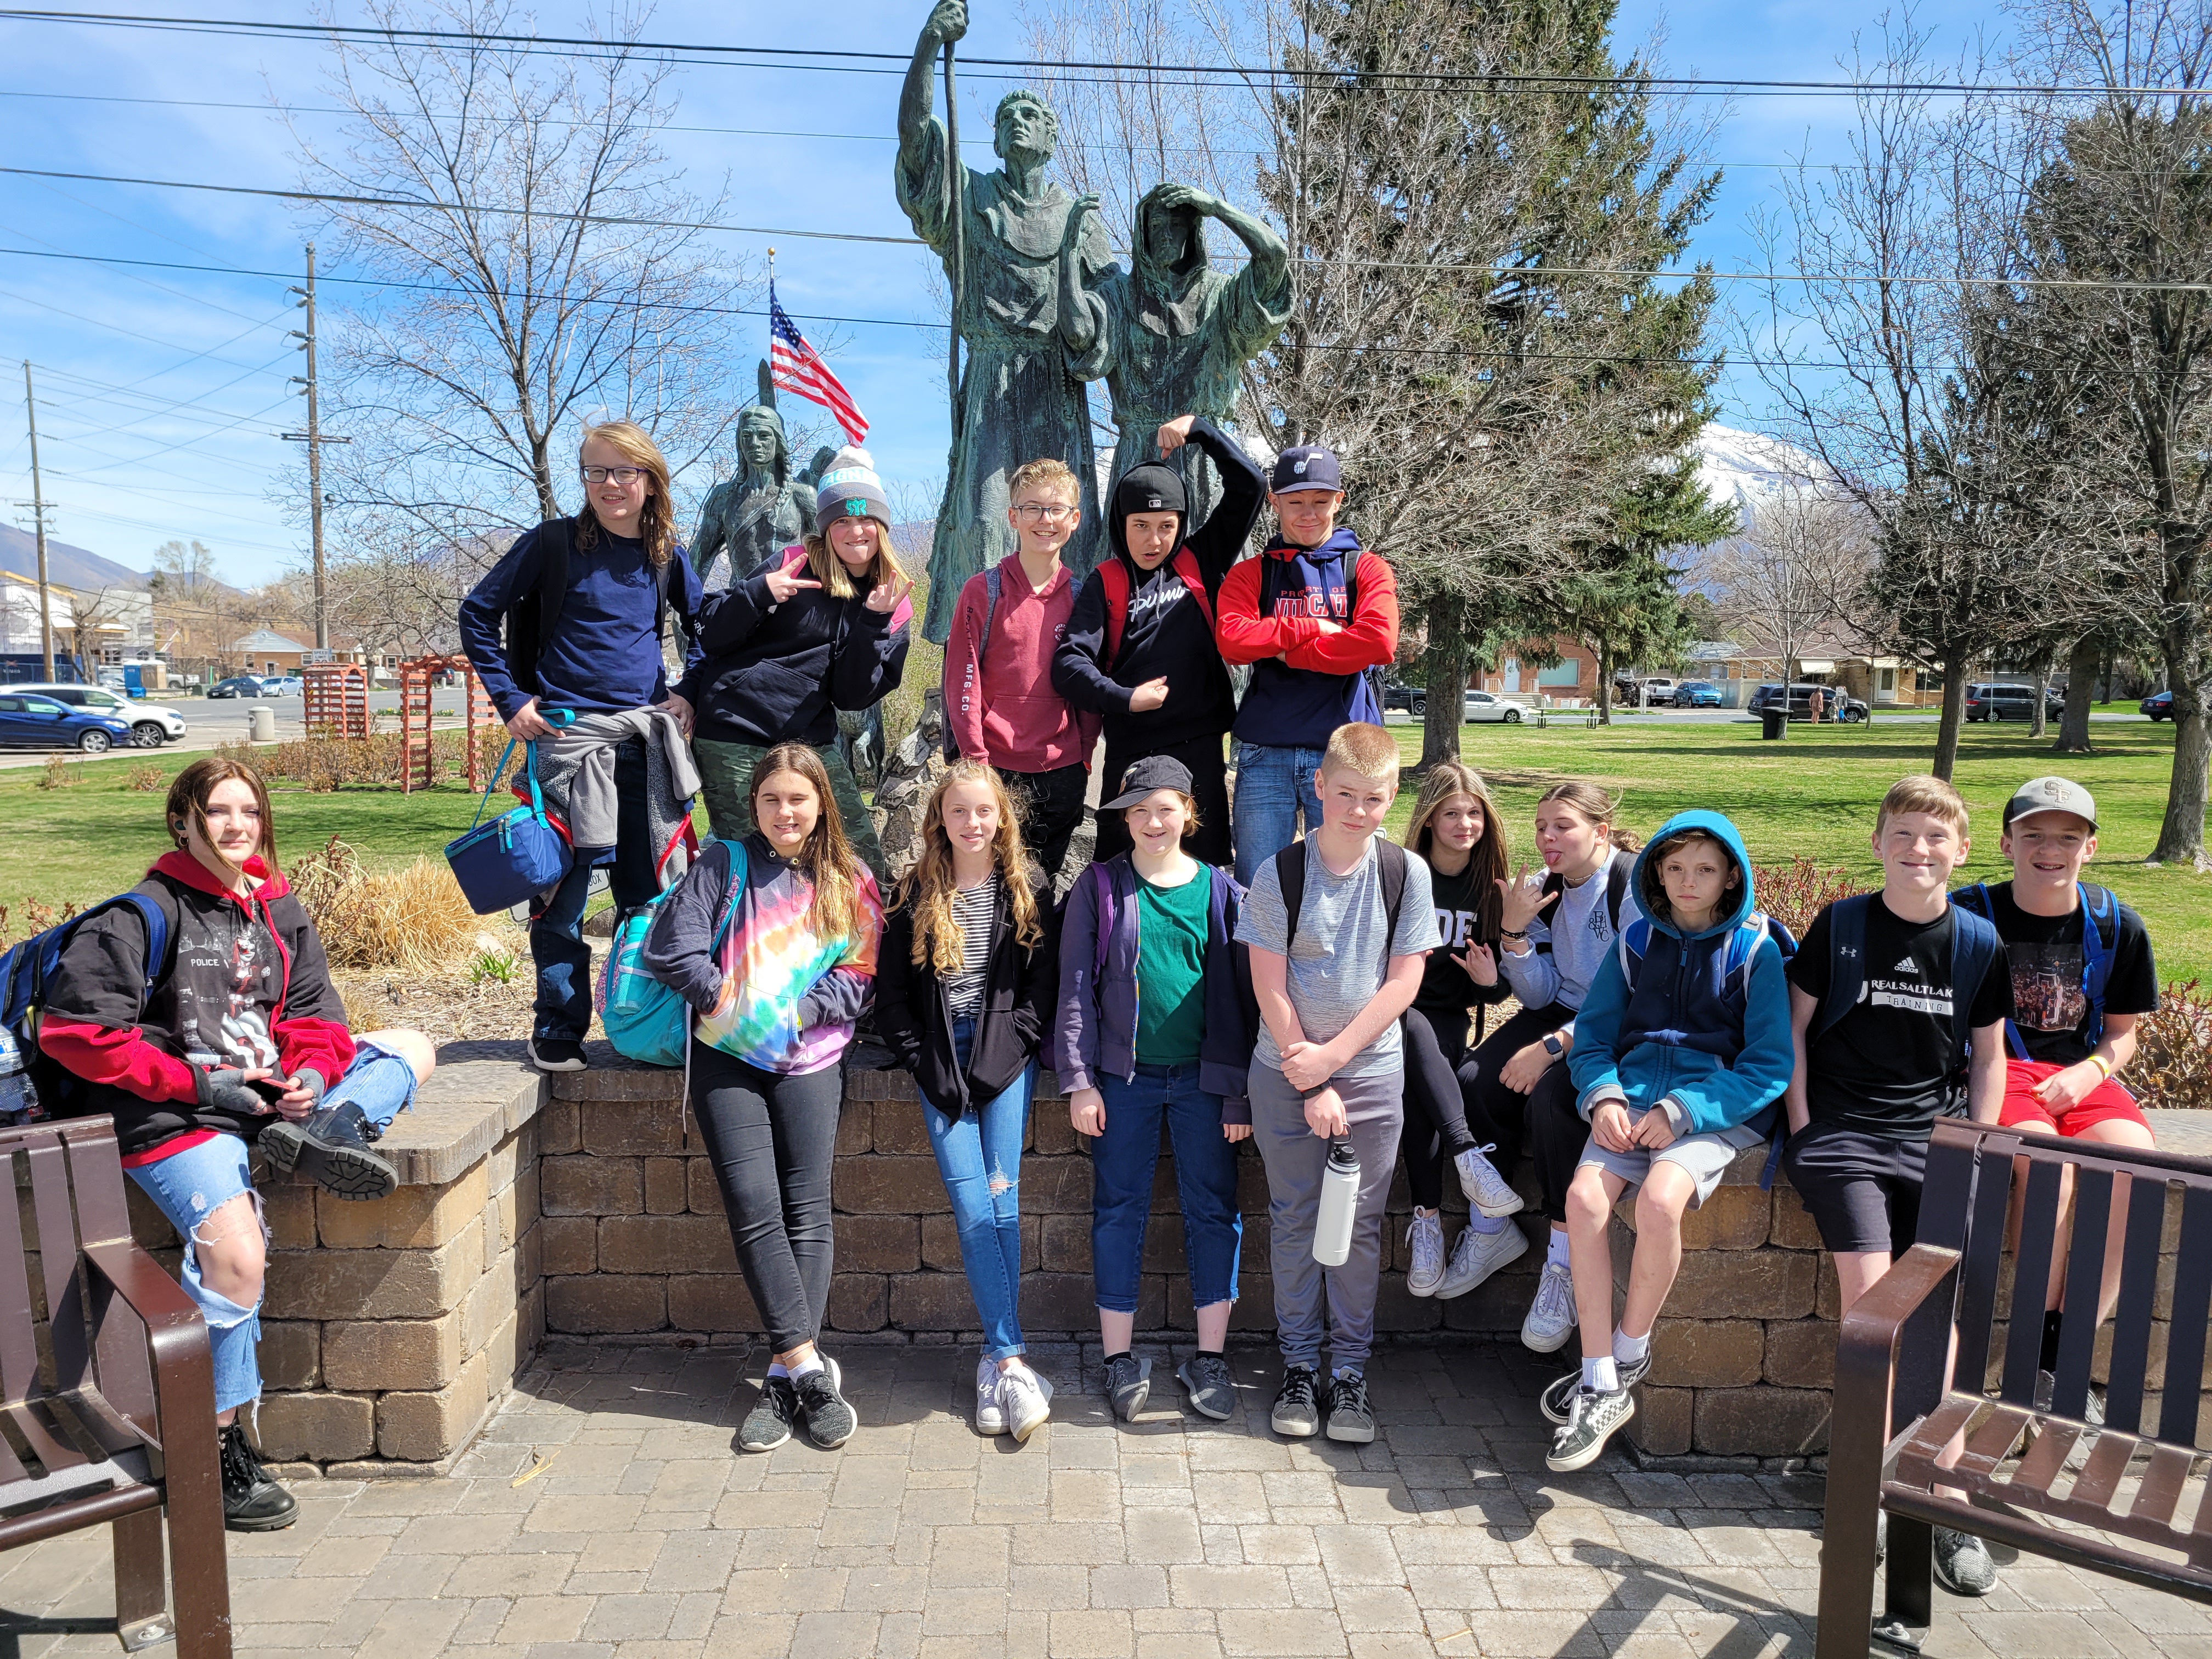 Students at the Escalante/Dominguez statue in the Spanish Fork City Park